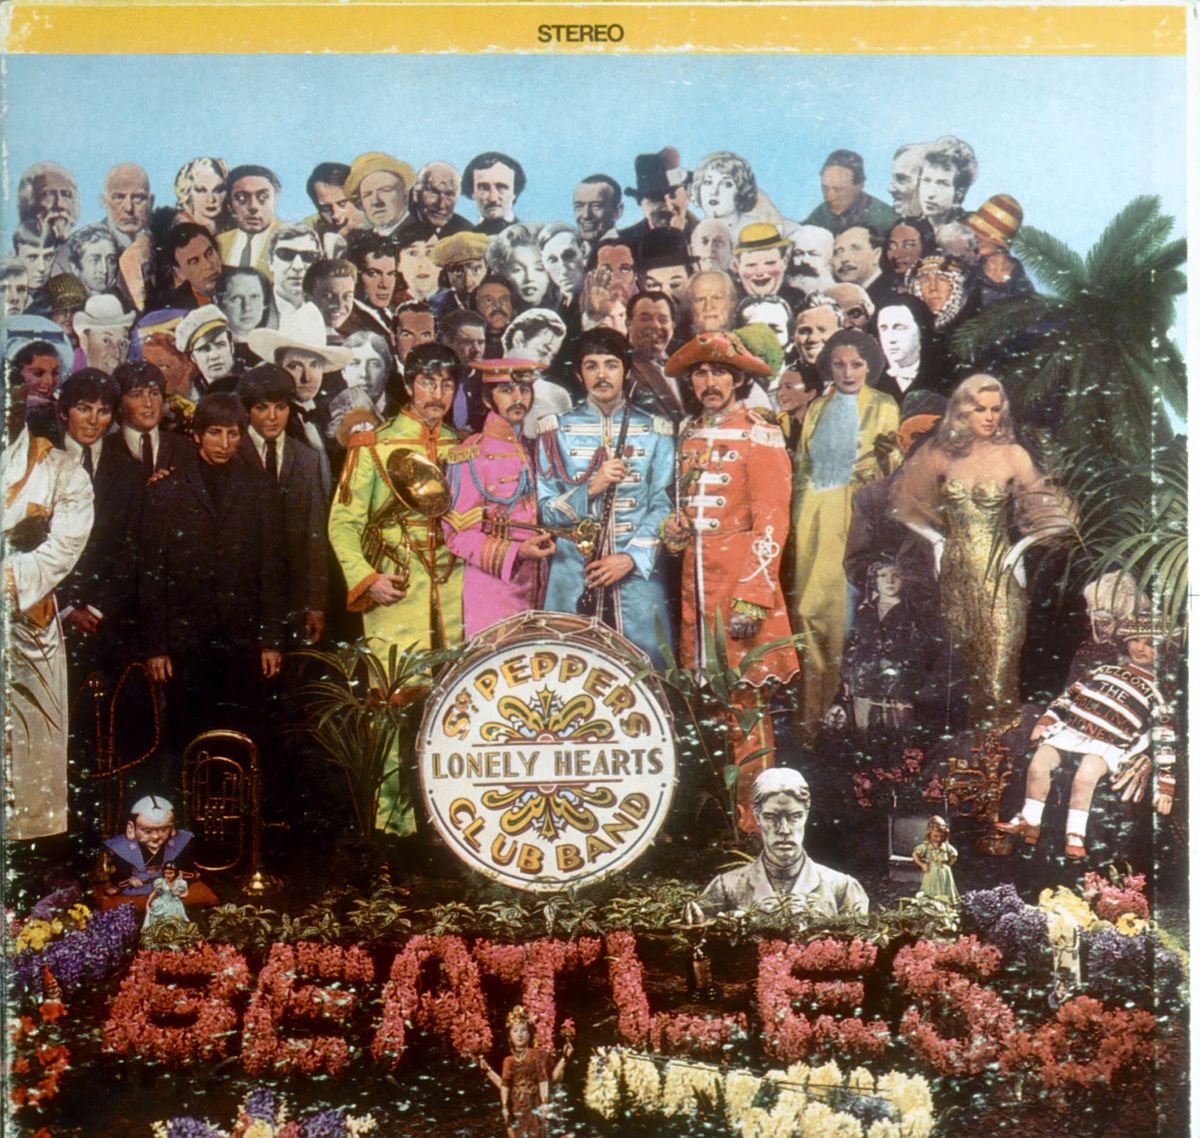 The Beatles stand in a crowd of people on the cover of 'Sgt. Pepper's Lonely Hearts Club Band.'